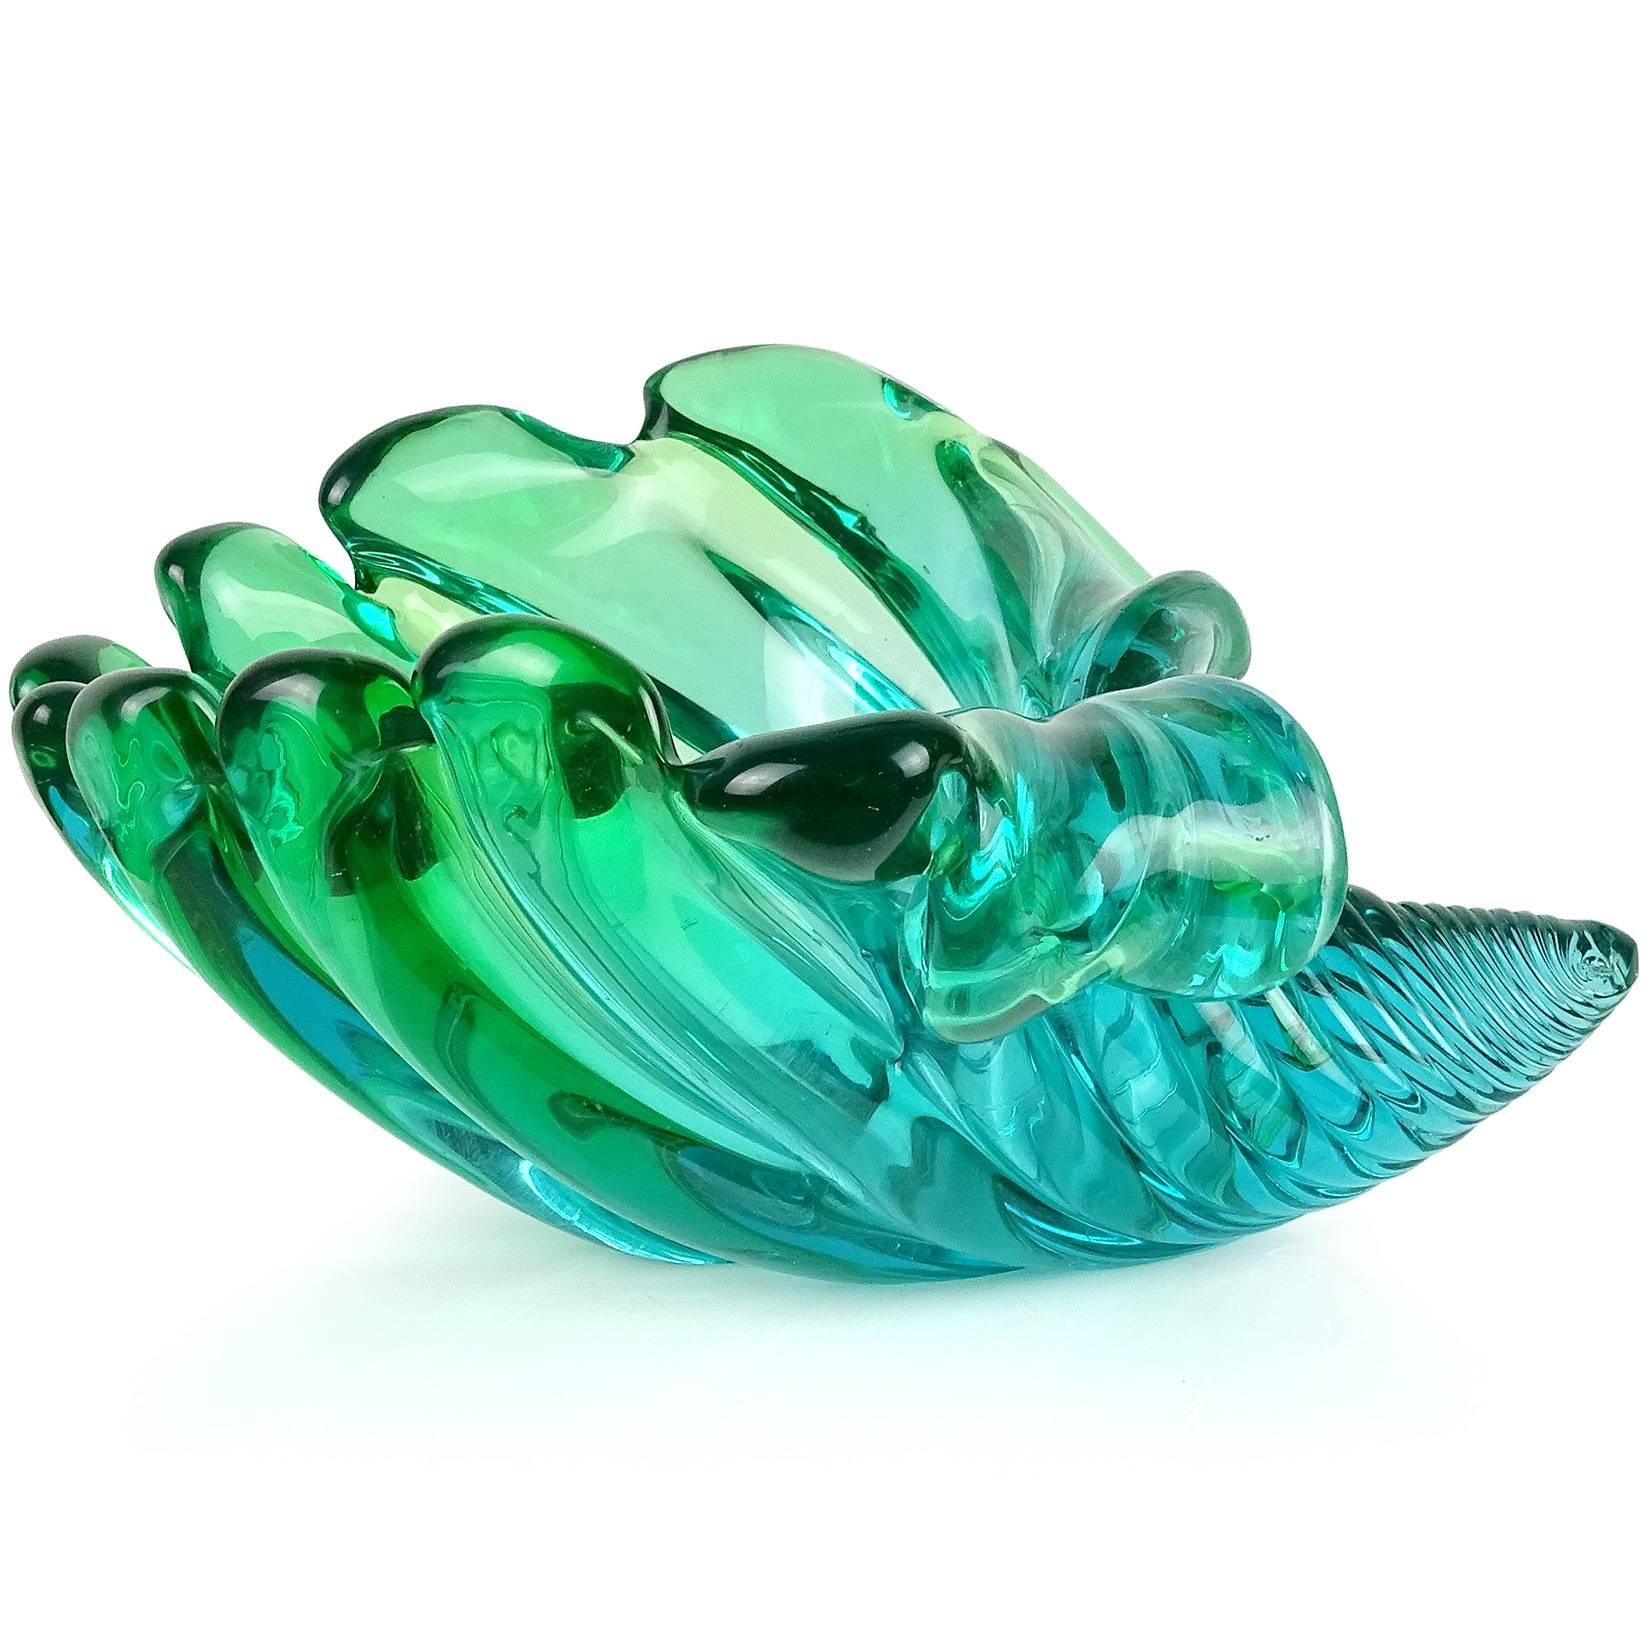 Hand-Crafted Murano Sommerso Blue Green Italian Art Glass Flared Seashell Sculpture Bowl